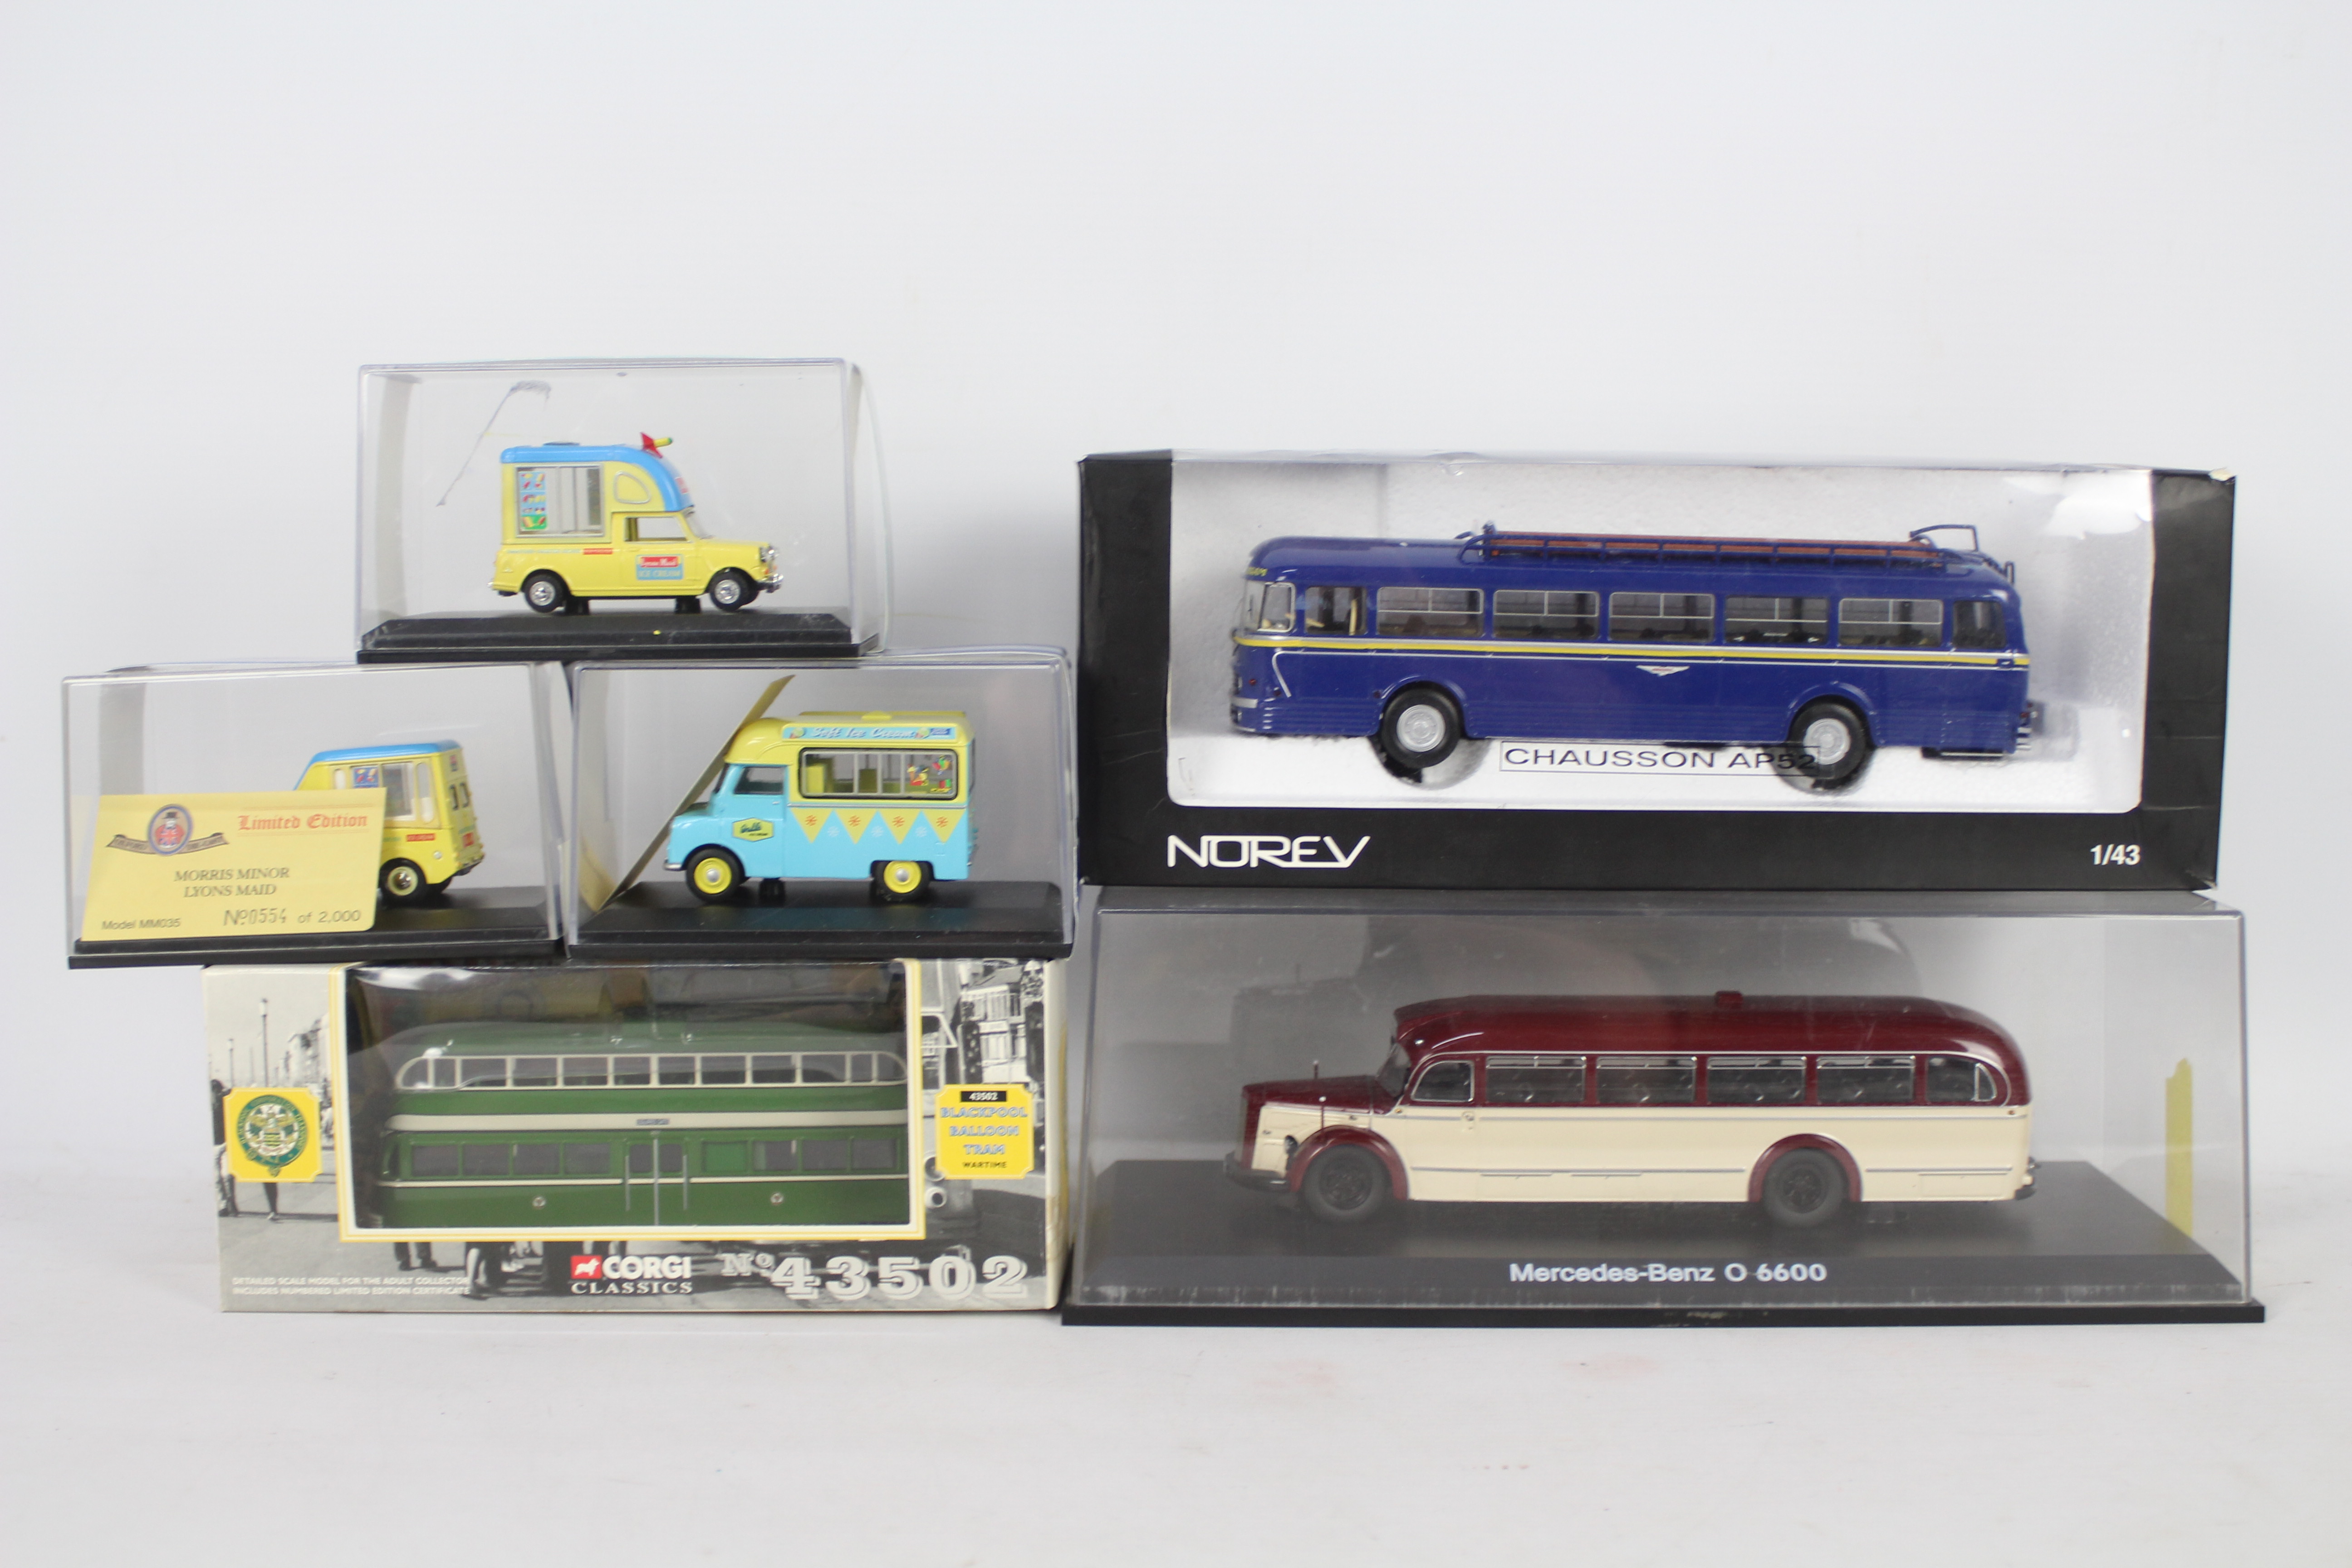 Norev, Schuco, Oxford Diecast, Corgi - Five boxed diecast model in various scales.